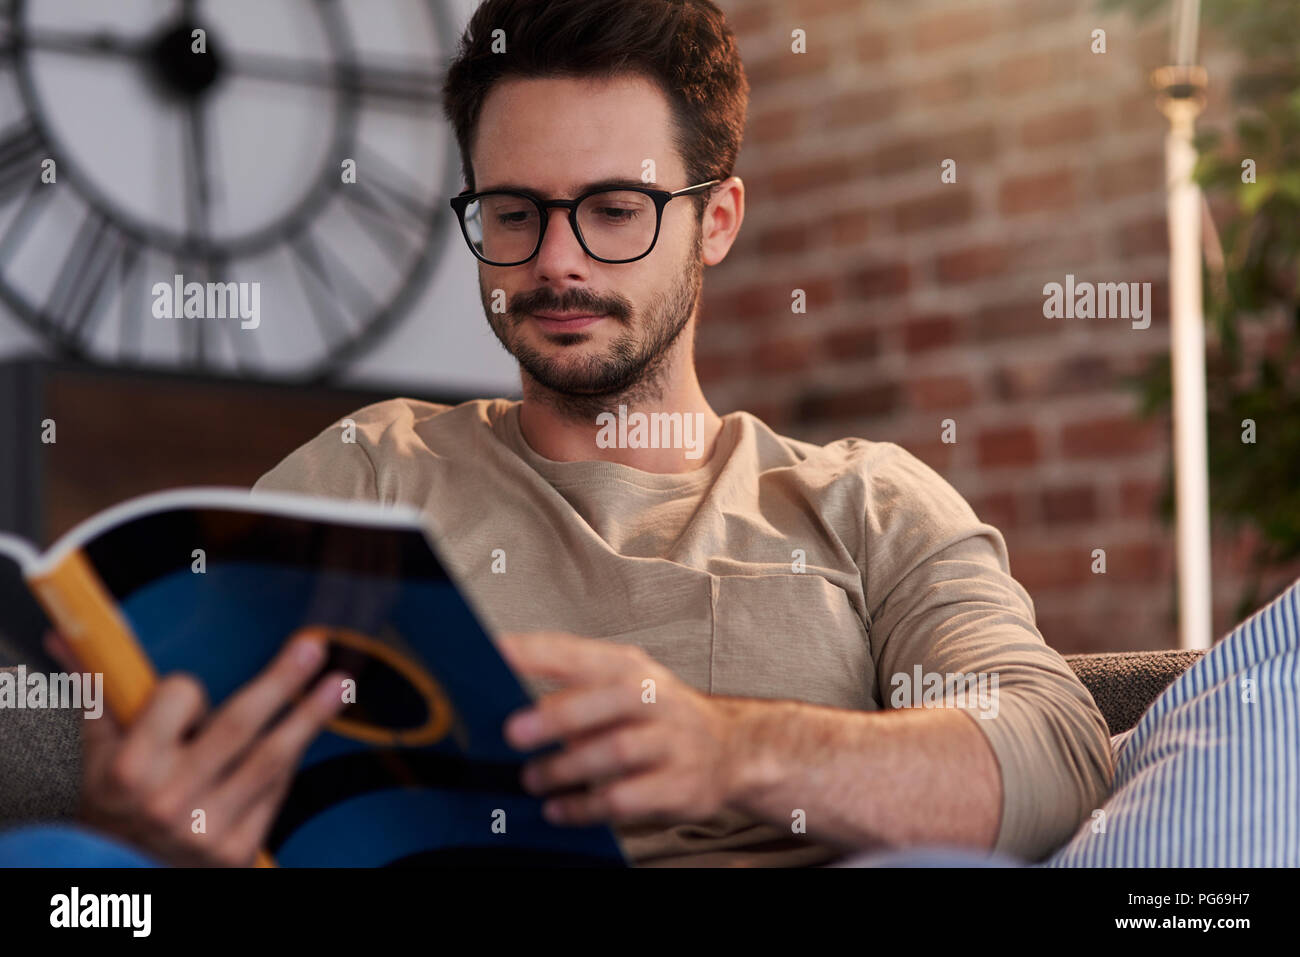 Portrait of man sitting on couch at home reading a book Stock Photo